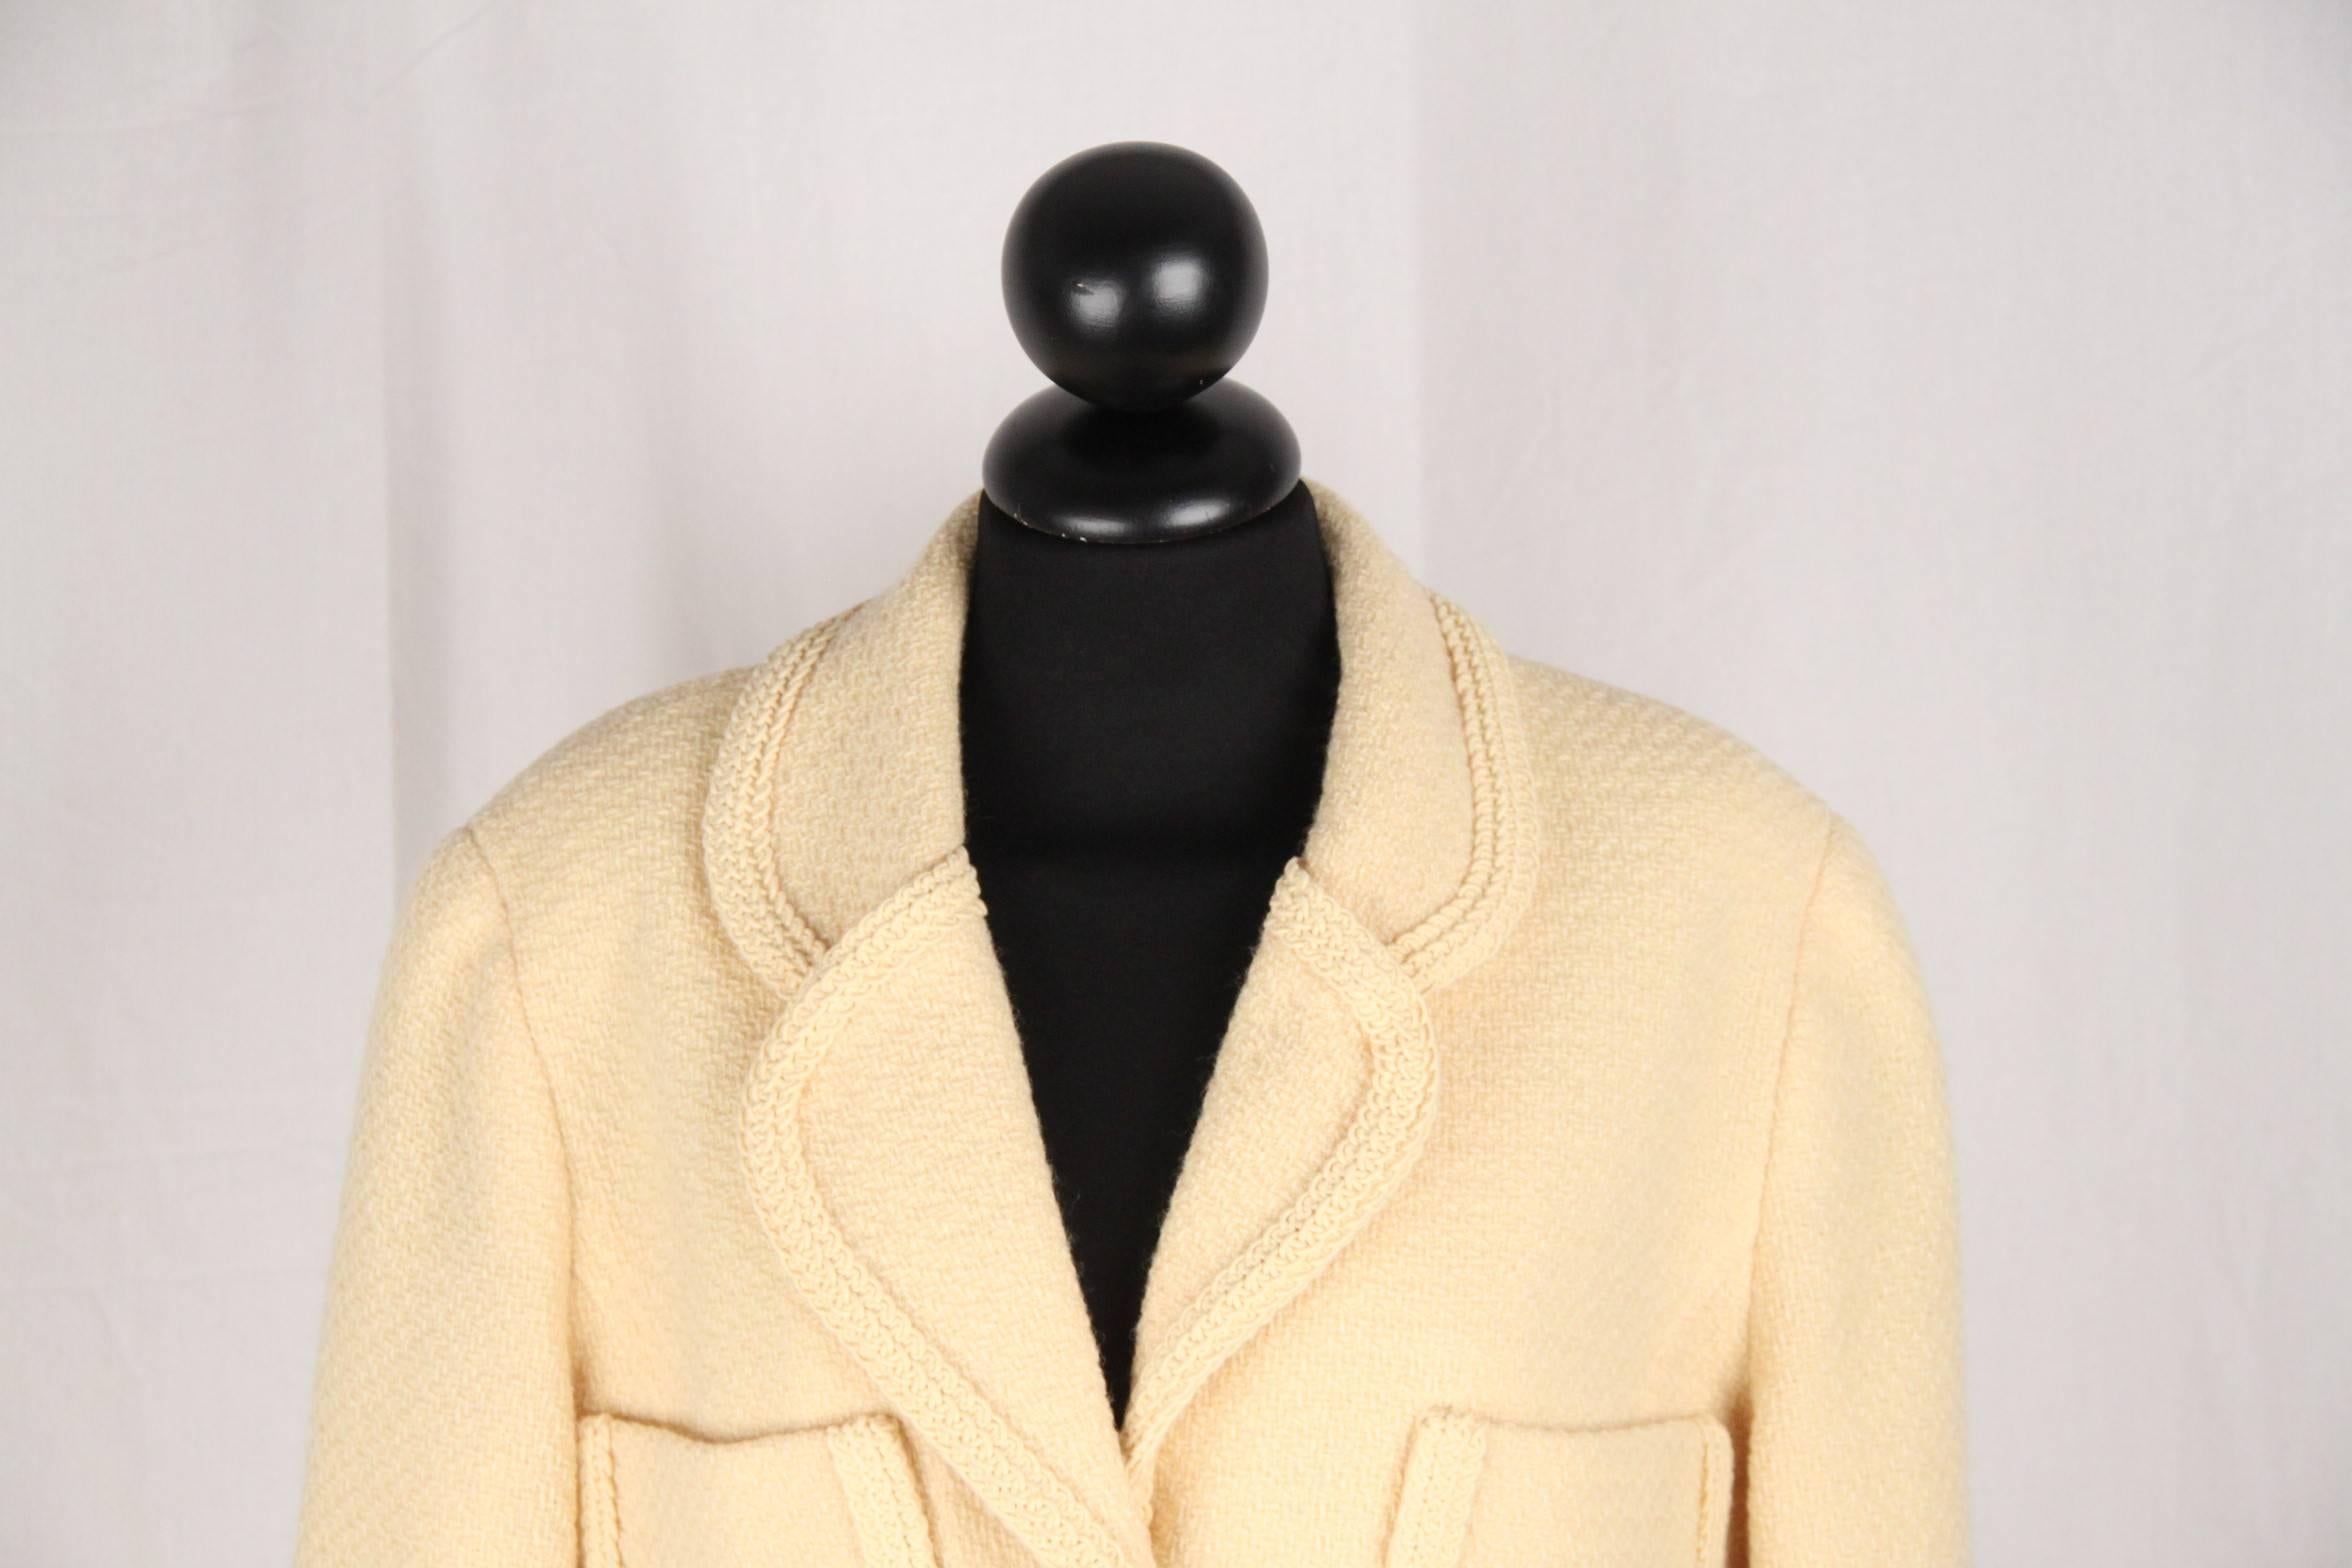 Logos / Tags: 'CHANEL BOUTIQUE' tag, composition & size tag, signature lining

Condition: B :GOOD CONDITION - Some light wear of use.

Condition details: Gently used! Very light halos on the lining on the underarms

Further Comments:
- Beautiful